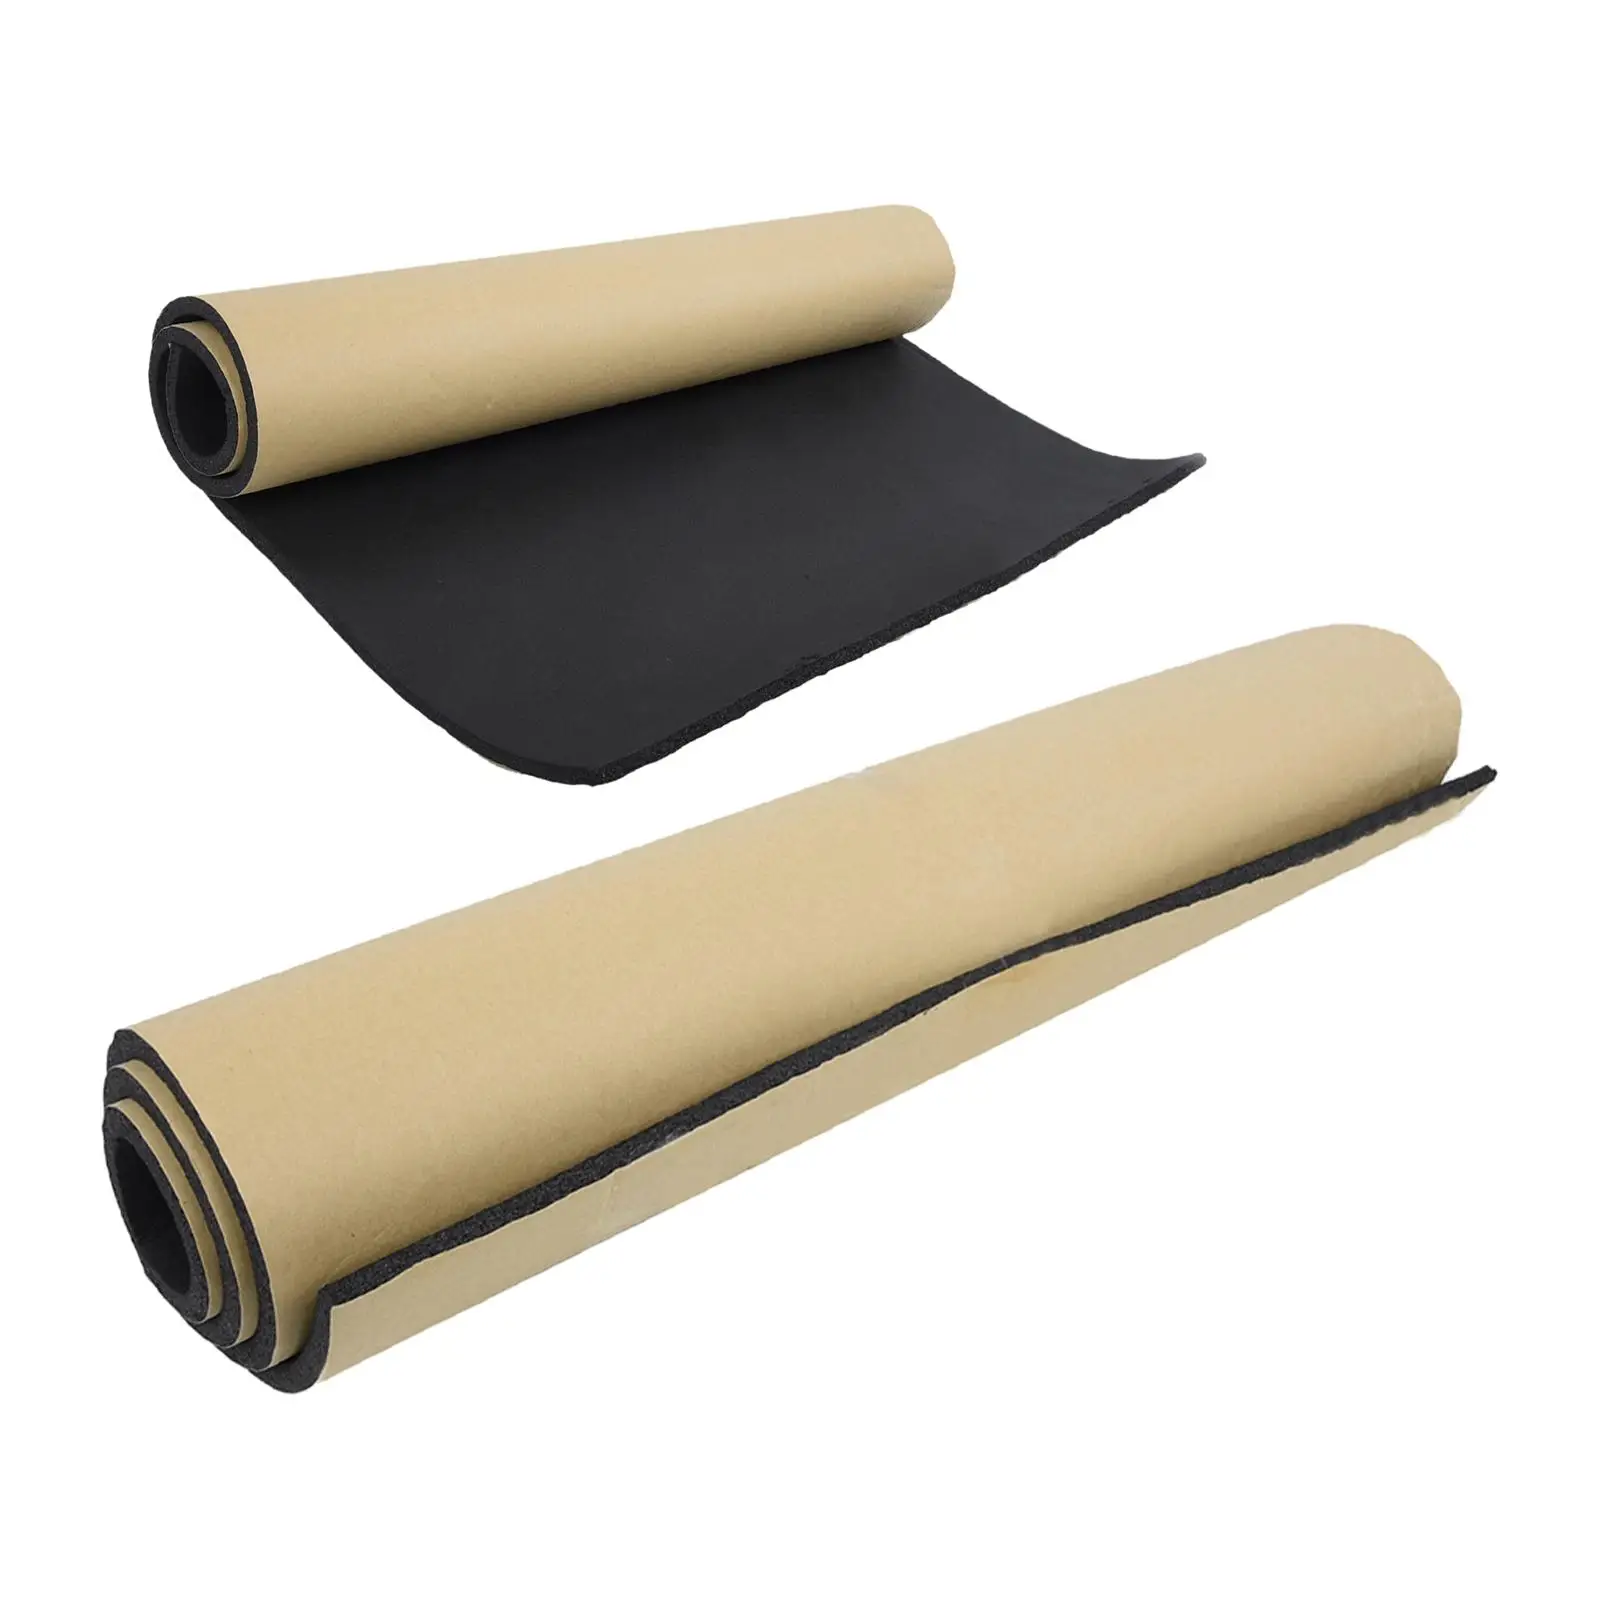 

Car Insulation Mat Waterproof Engine Insulation Foam Laminate Easily Install for Engine Hood Roof Soundproof